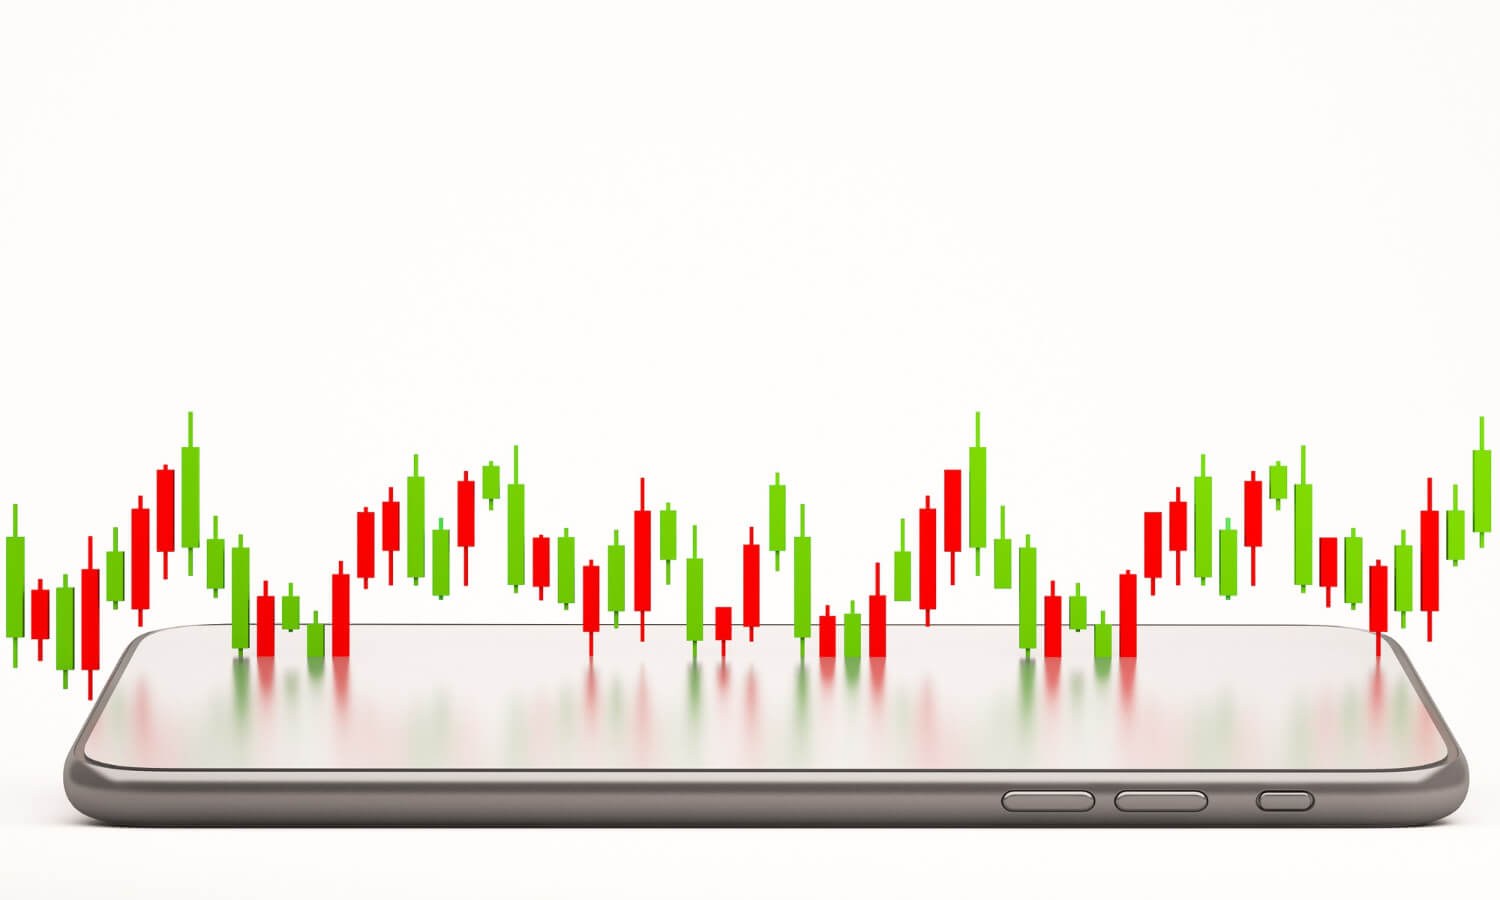 candle stick graph chart online stock market trading with mobile phone 3d render illustration background (1)